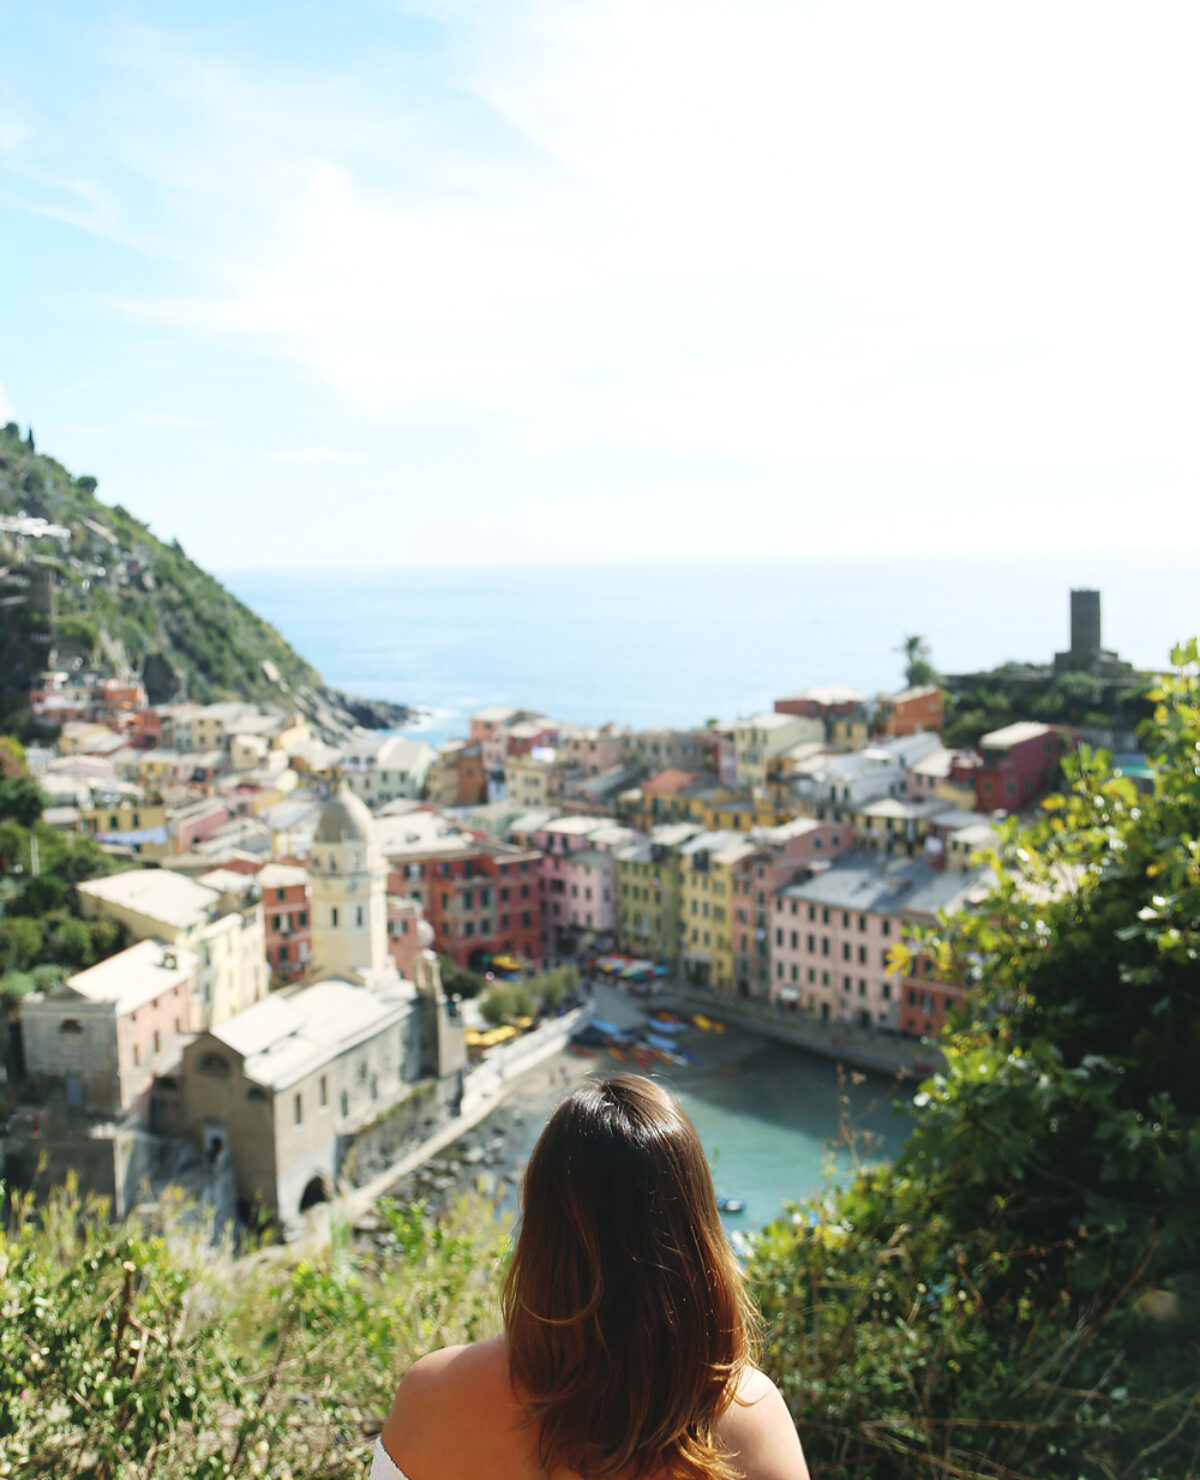 The ultimate 3 week itinerary to Italy